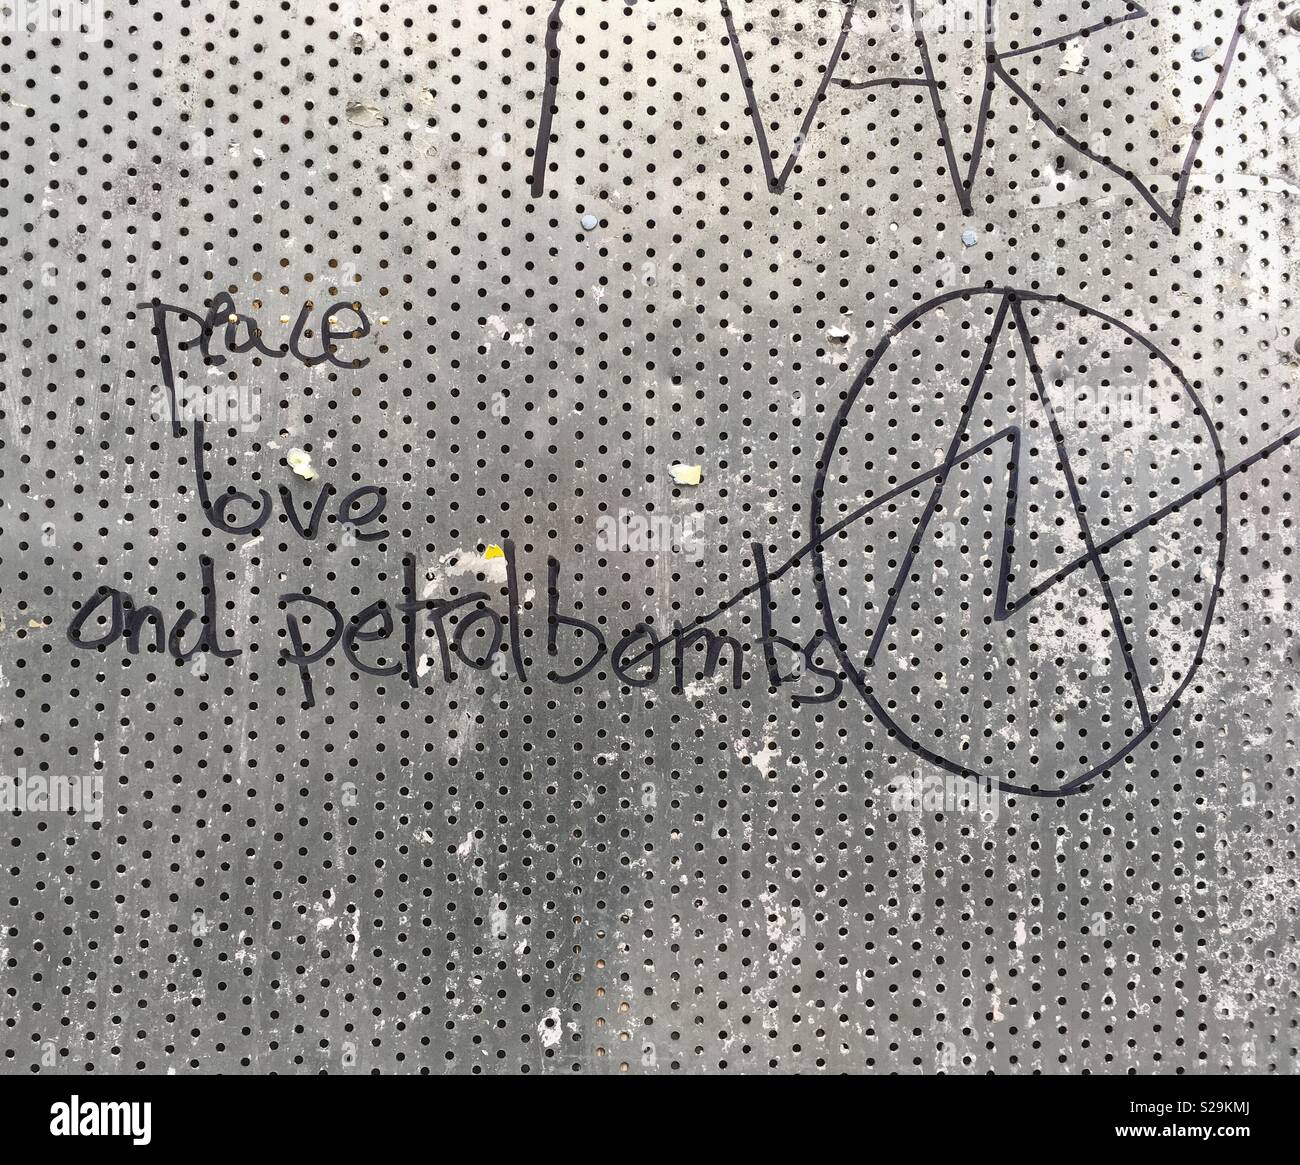 The slogan “peace love and petrol bombs” written on a screen covering the window of an empty shop in Bristol, UK Stock Photo